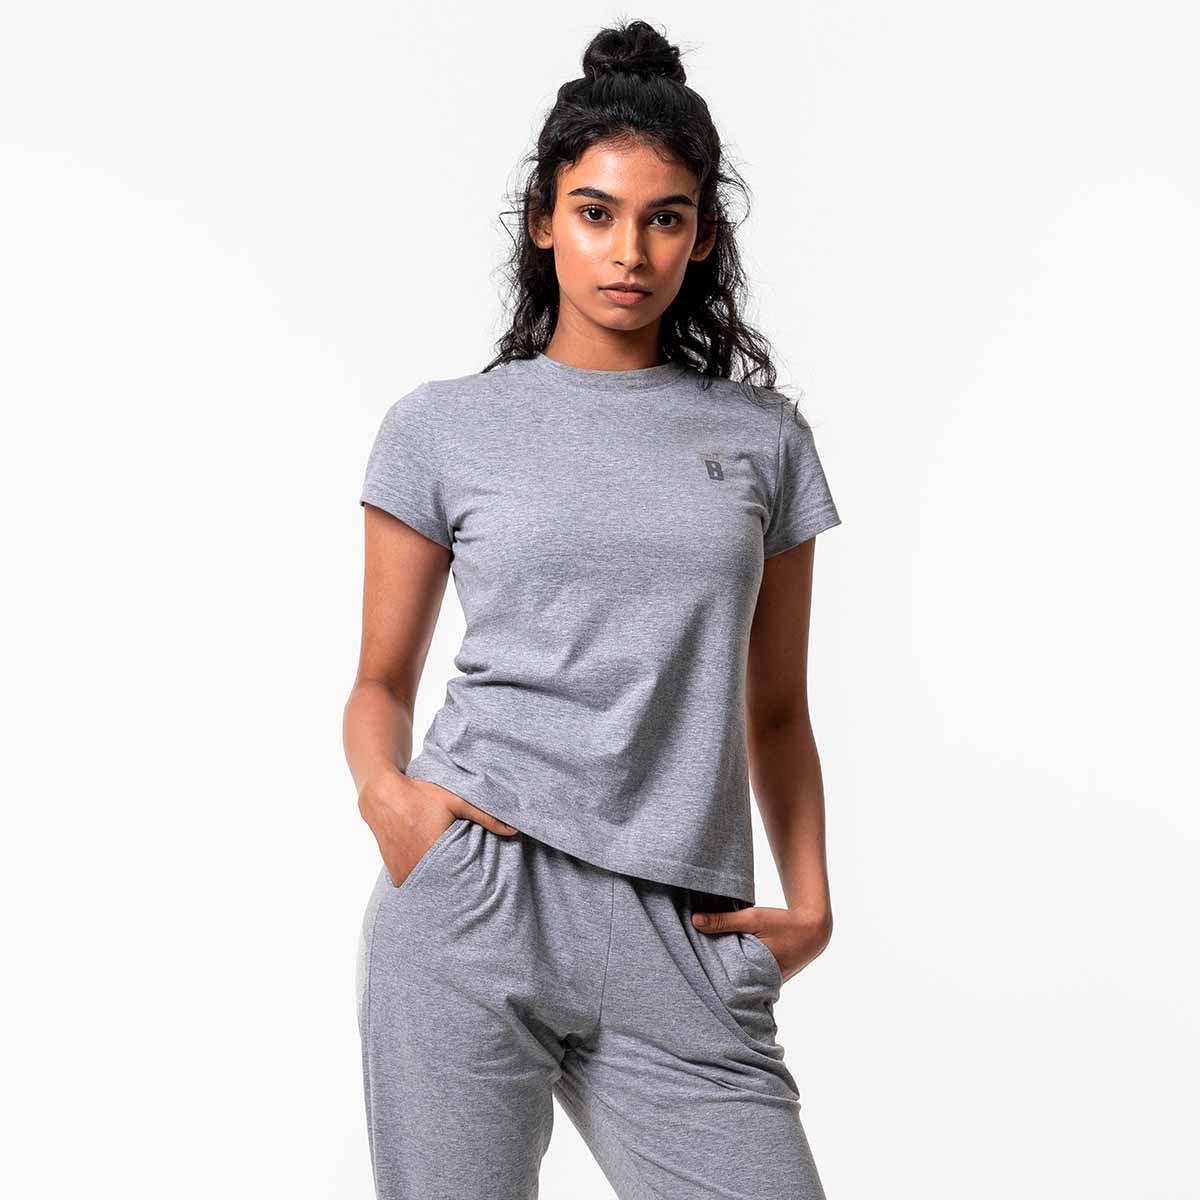 Grey Lounge Life Top for Women